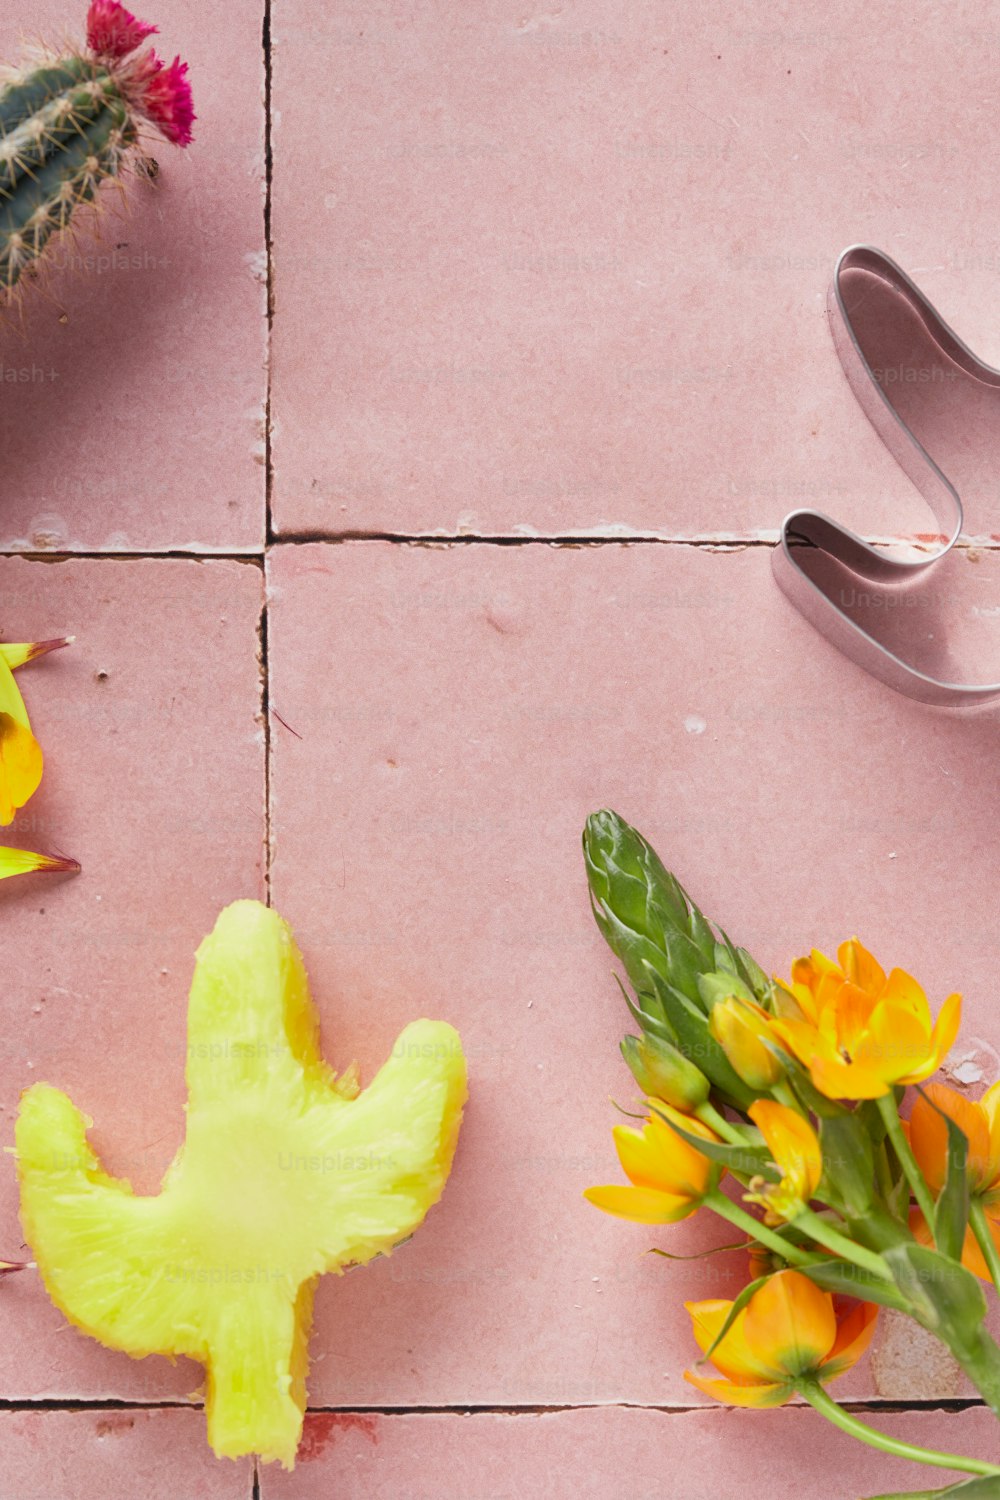 a pair of scissors and some flowers on a tile floor